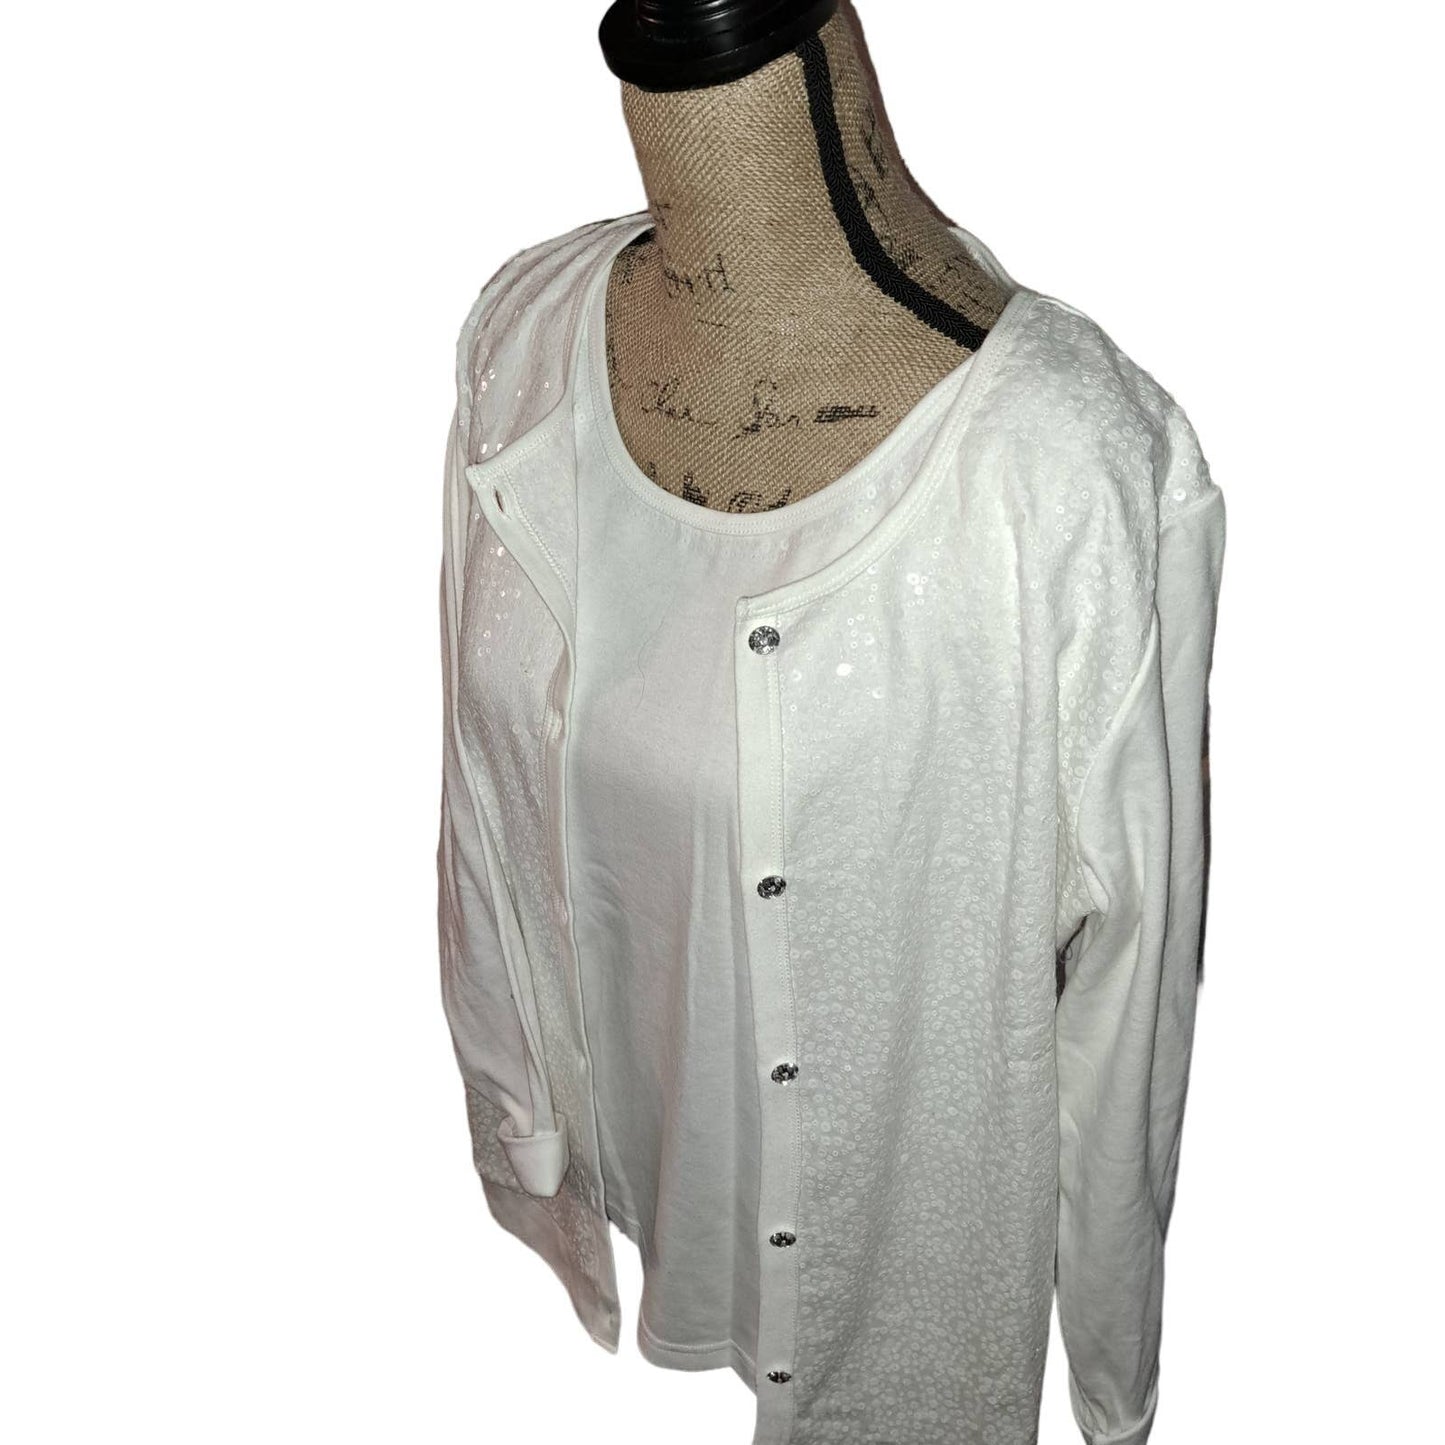 NEW Winter White Quaker factory Cardigan & attached Tee Crystal Buttons Large